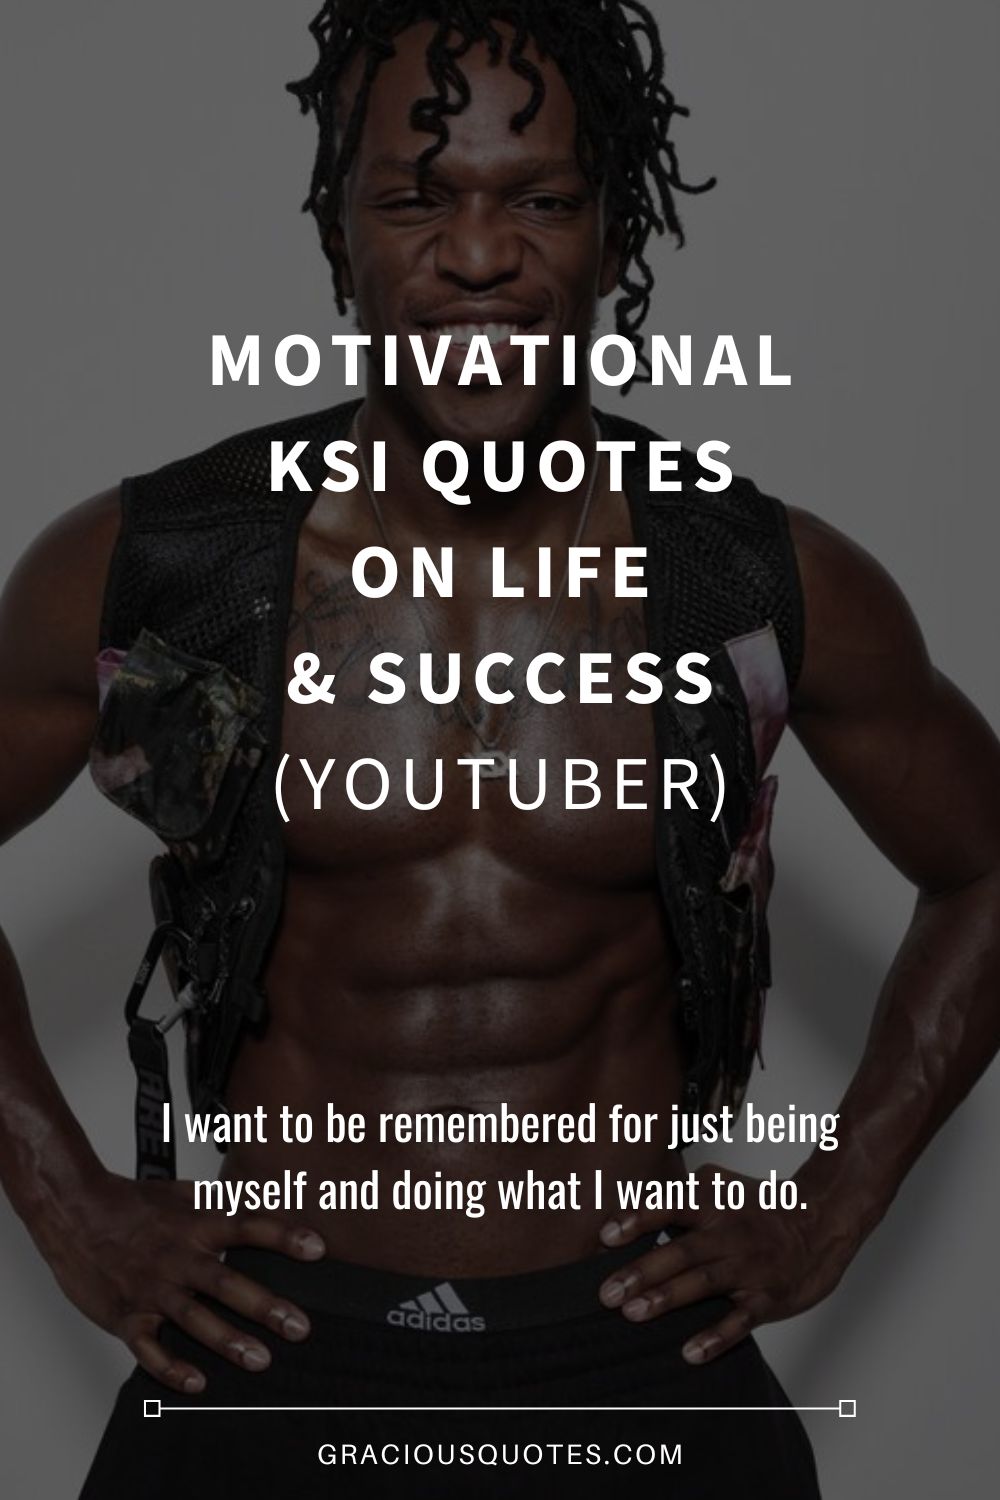 Motivational KSI Quotes on Life & Success (YOUTUBER) - Gracious Quotes